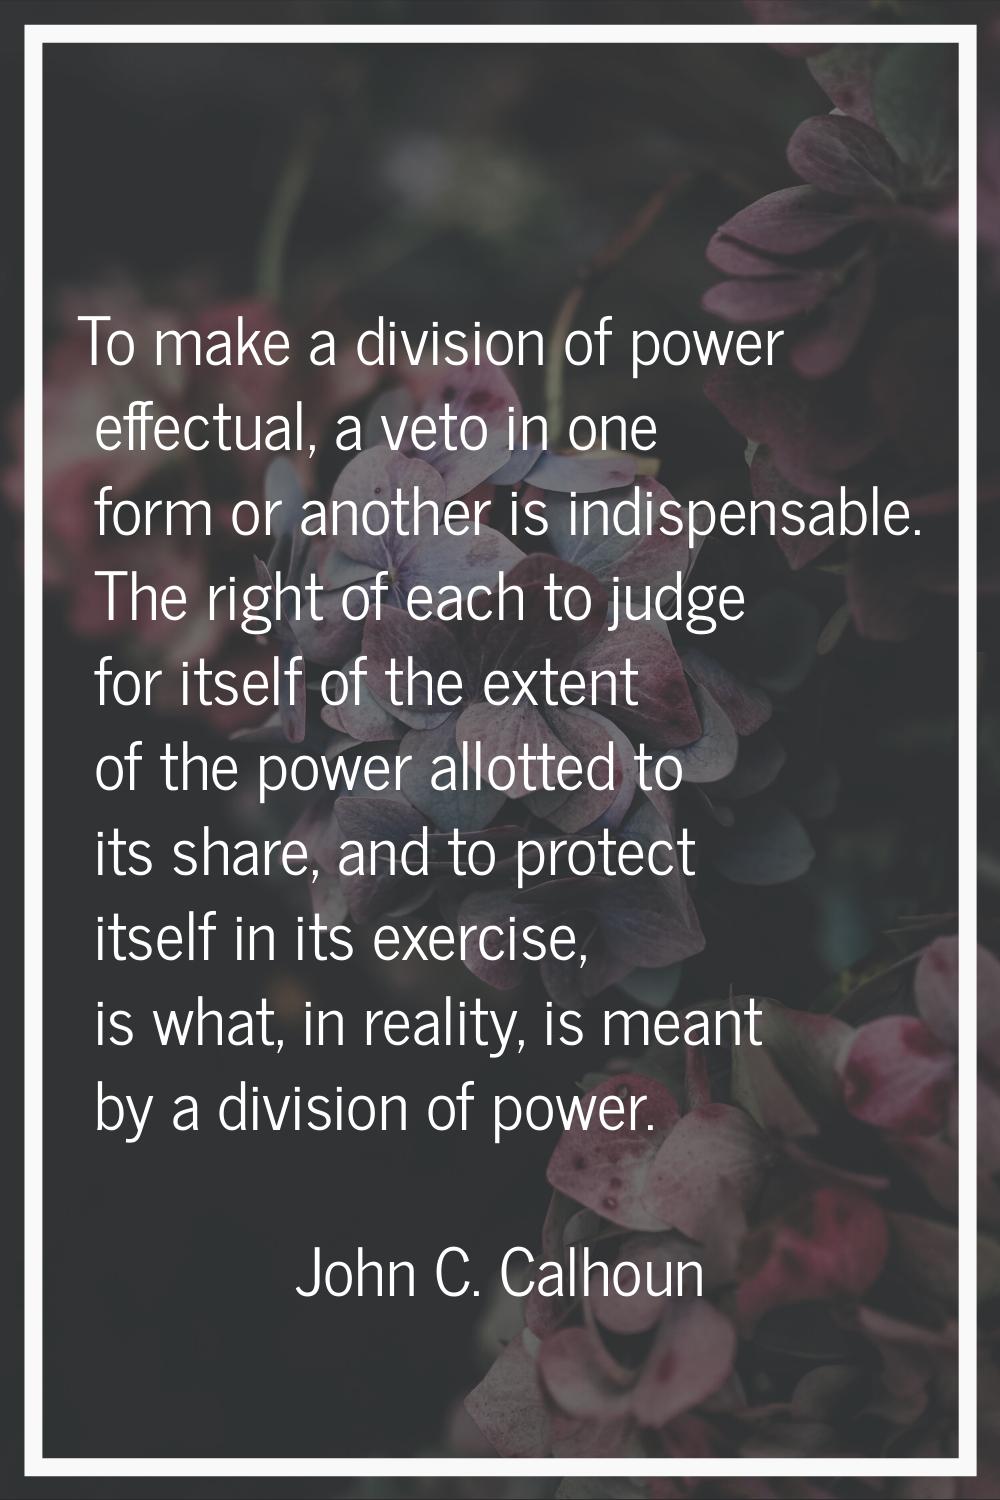 To make a division of power effectual, a veto in one form or another is indispensable. The right of